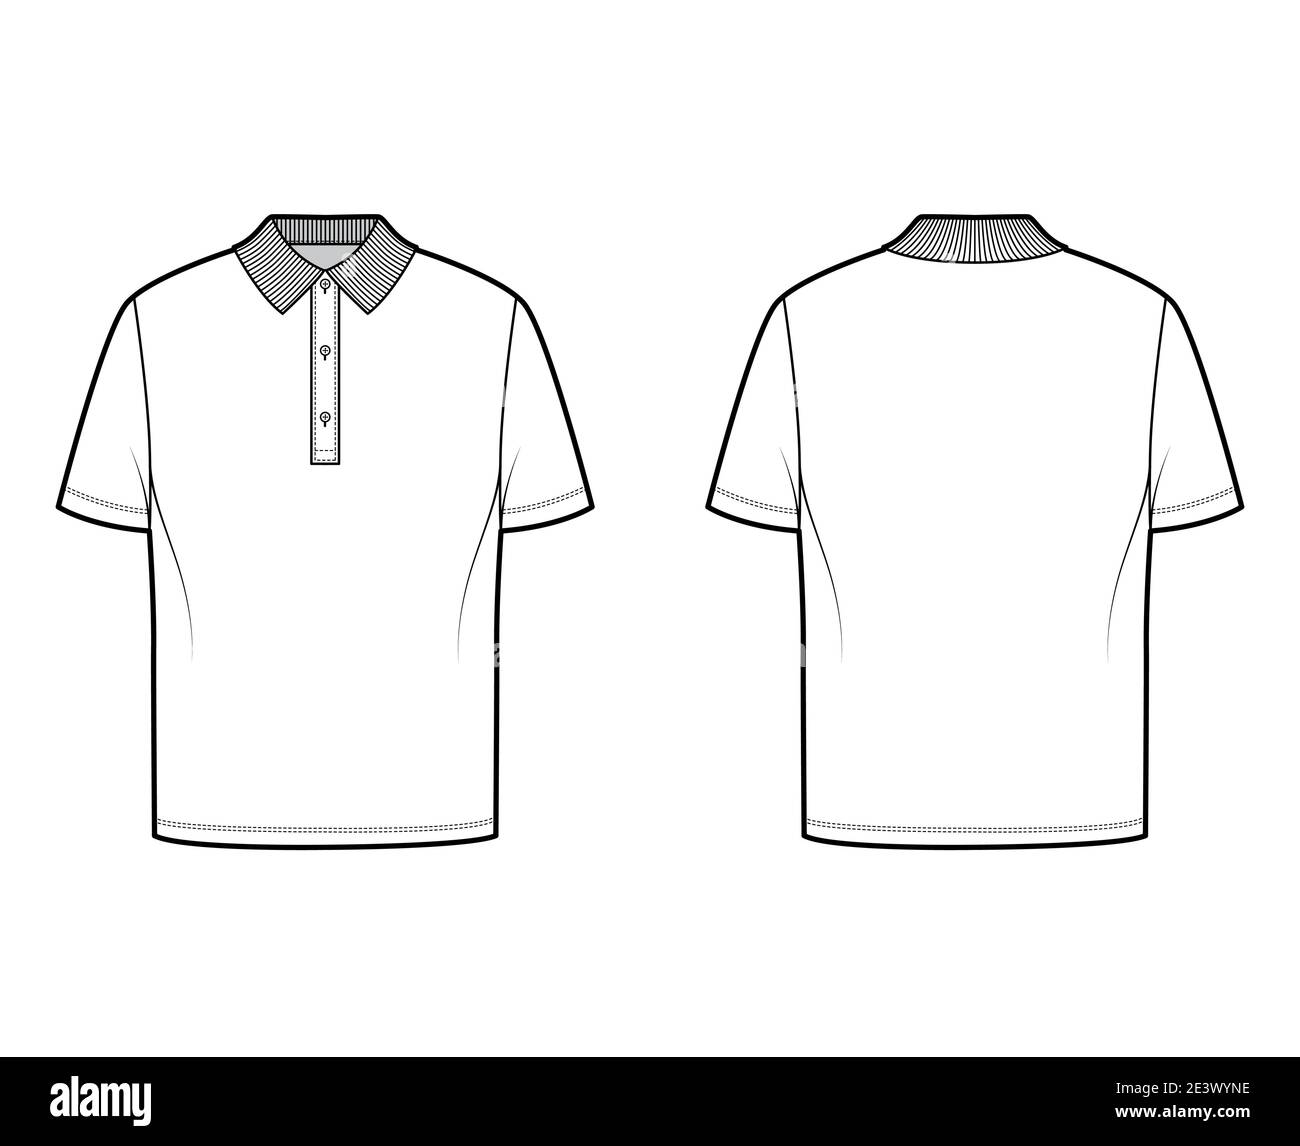 Shirt polo technical fashion illustration with short sleeves, tunic length, henley neck, oversized, flat knit collar. Apparel top outwear template front, back, white color. Women men unisex CAD mockup Stock Vector